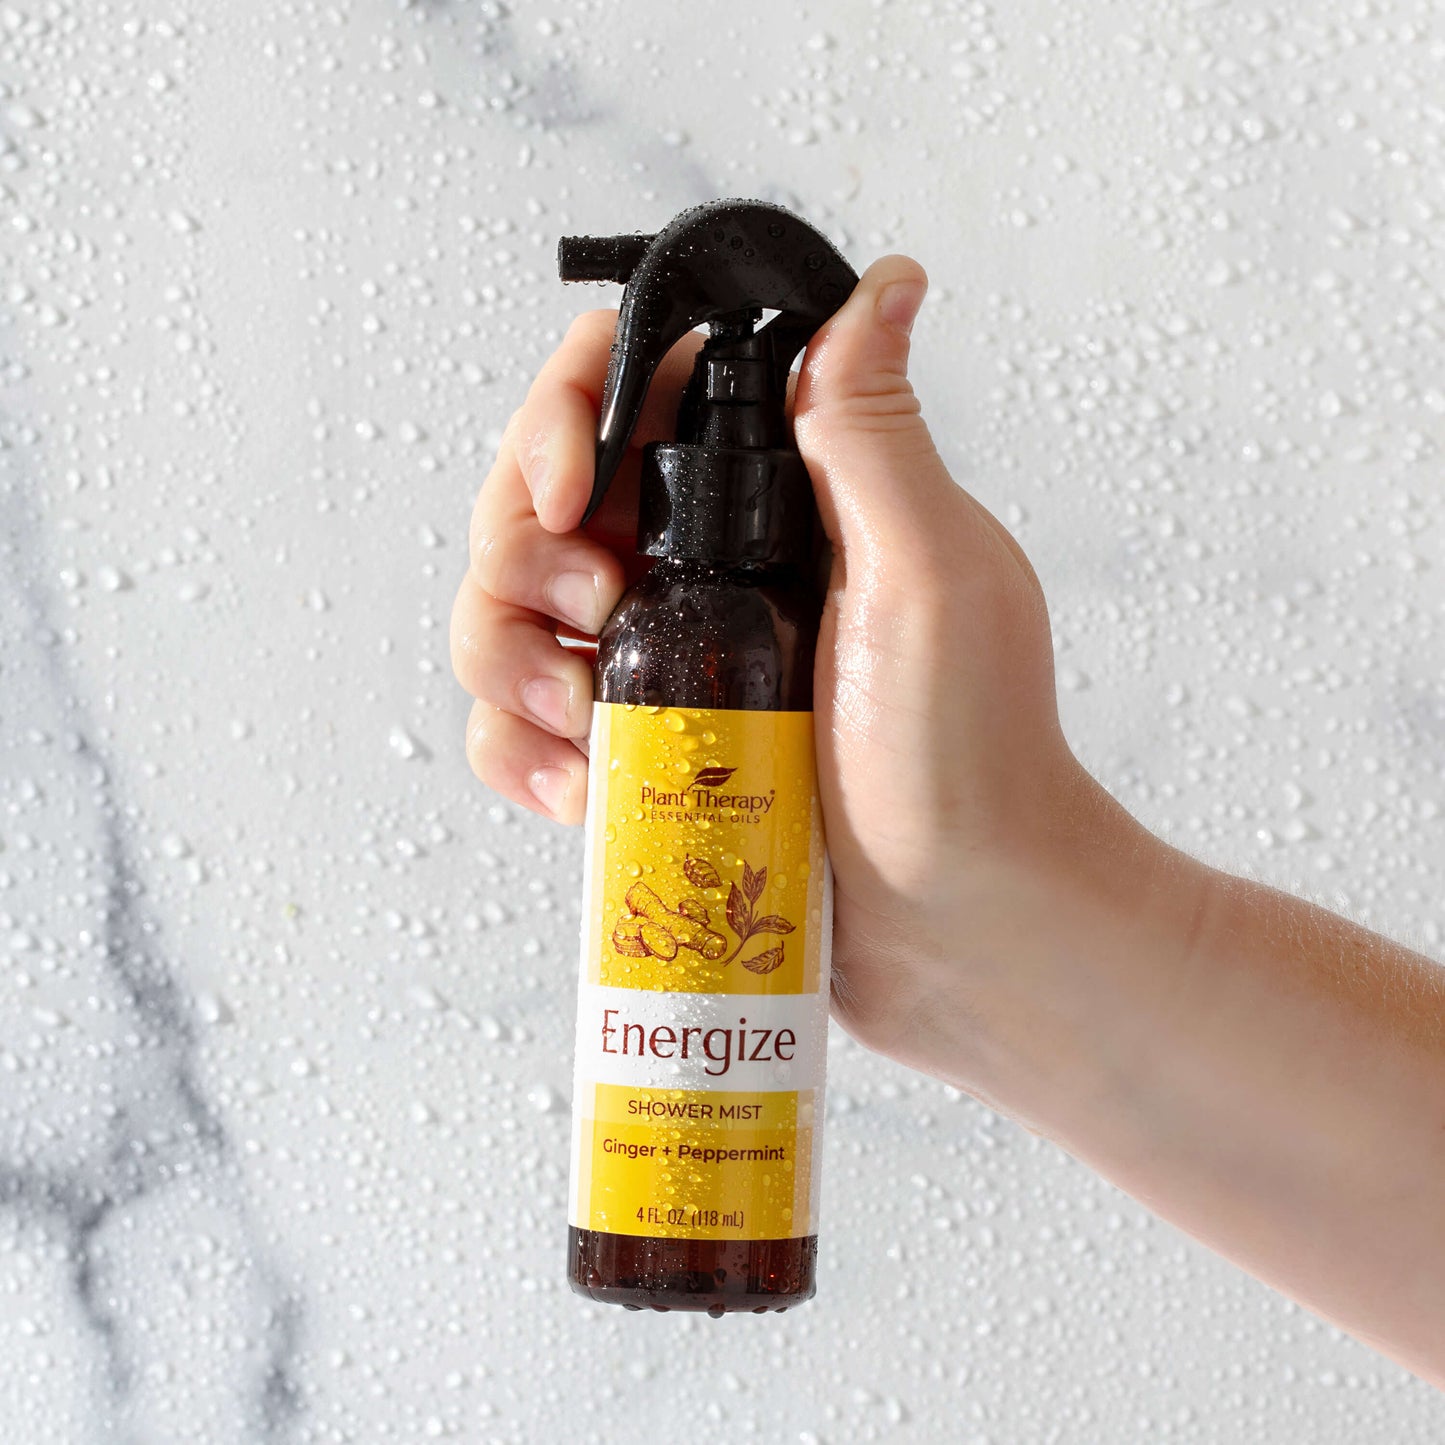 Energize Shower Mist in use